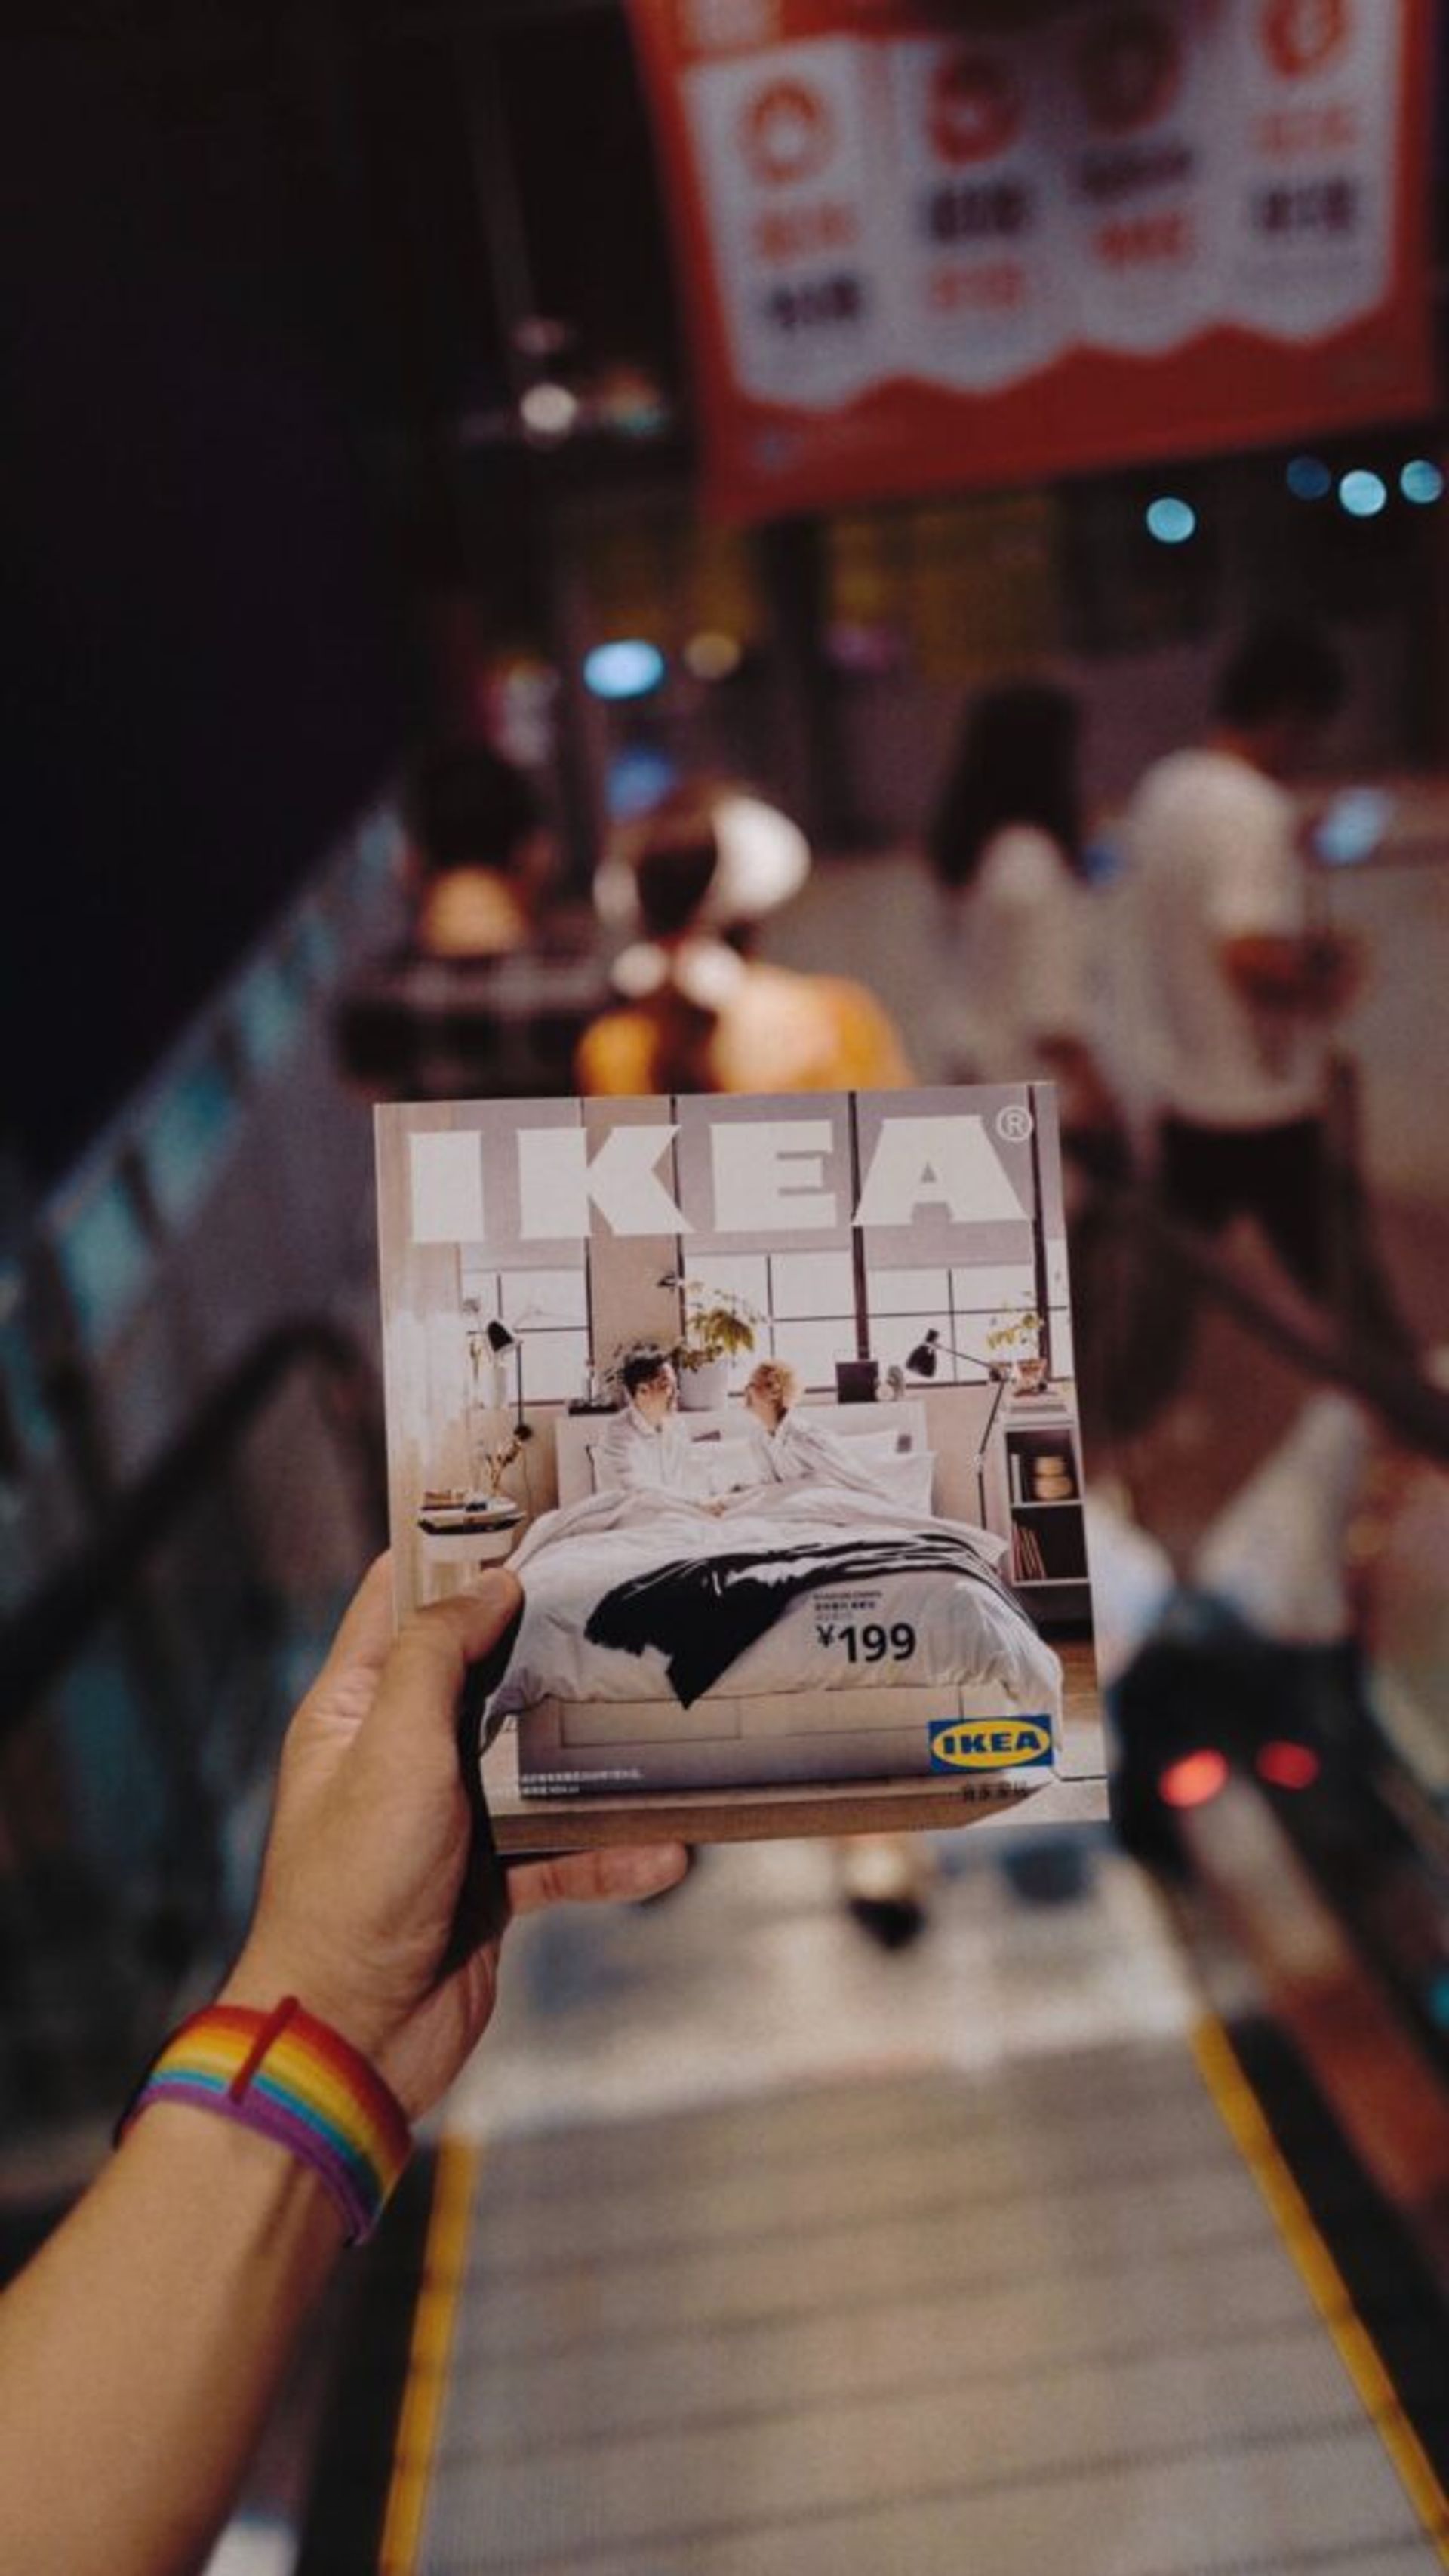 A close-up of a hand holding an IKEA brochure on an moving walkway.